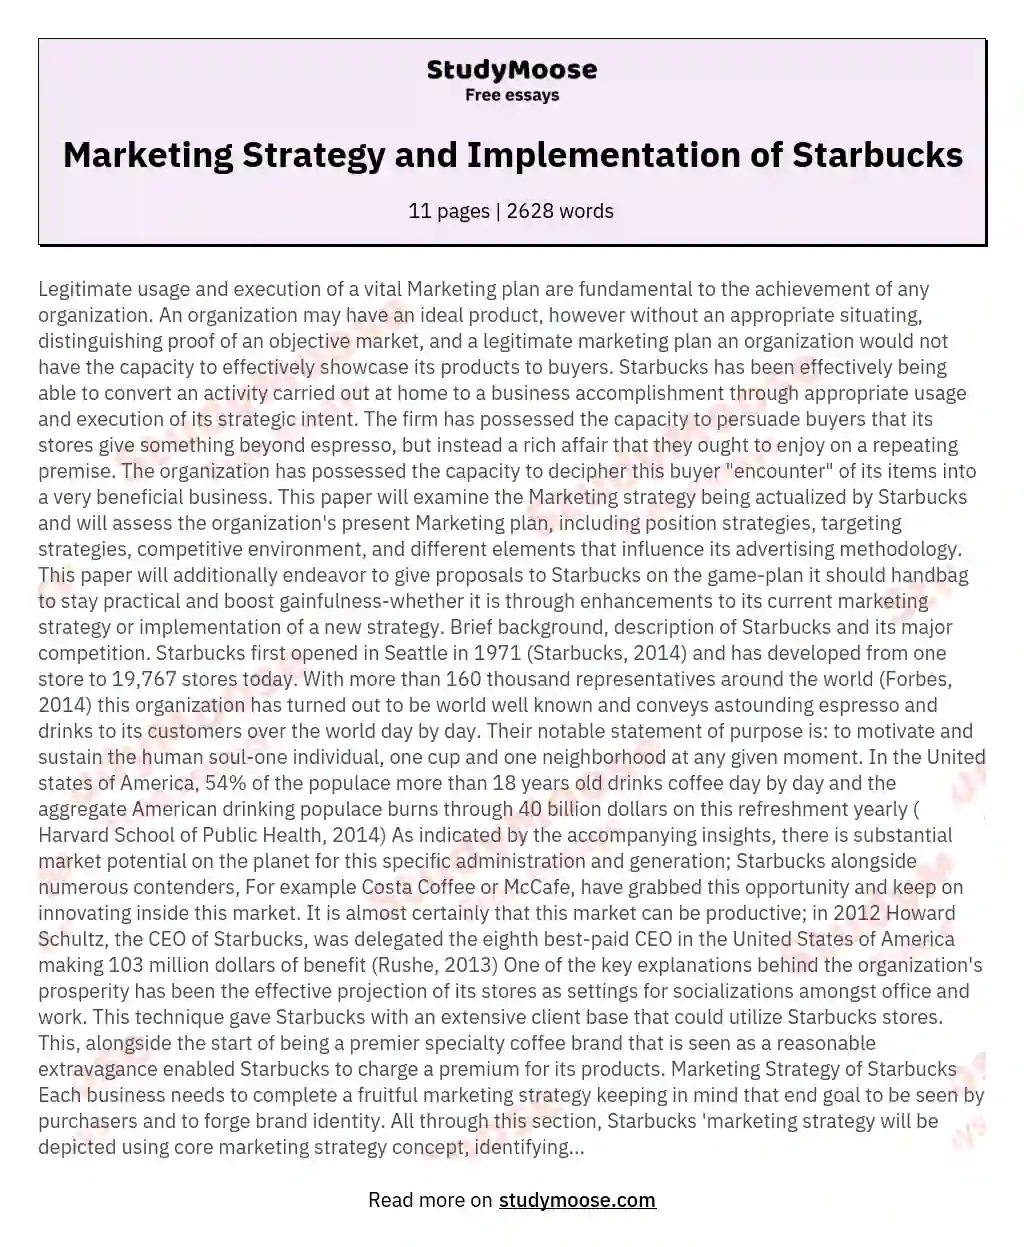 Marketing Strategy and Implementation of Starbucks